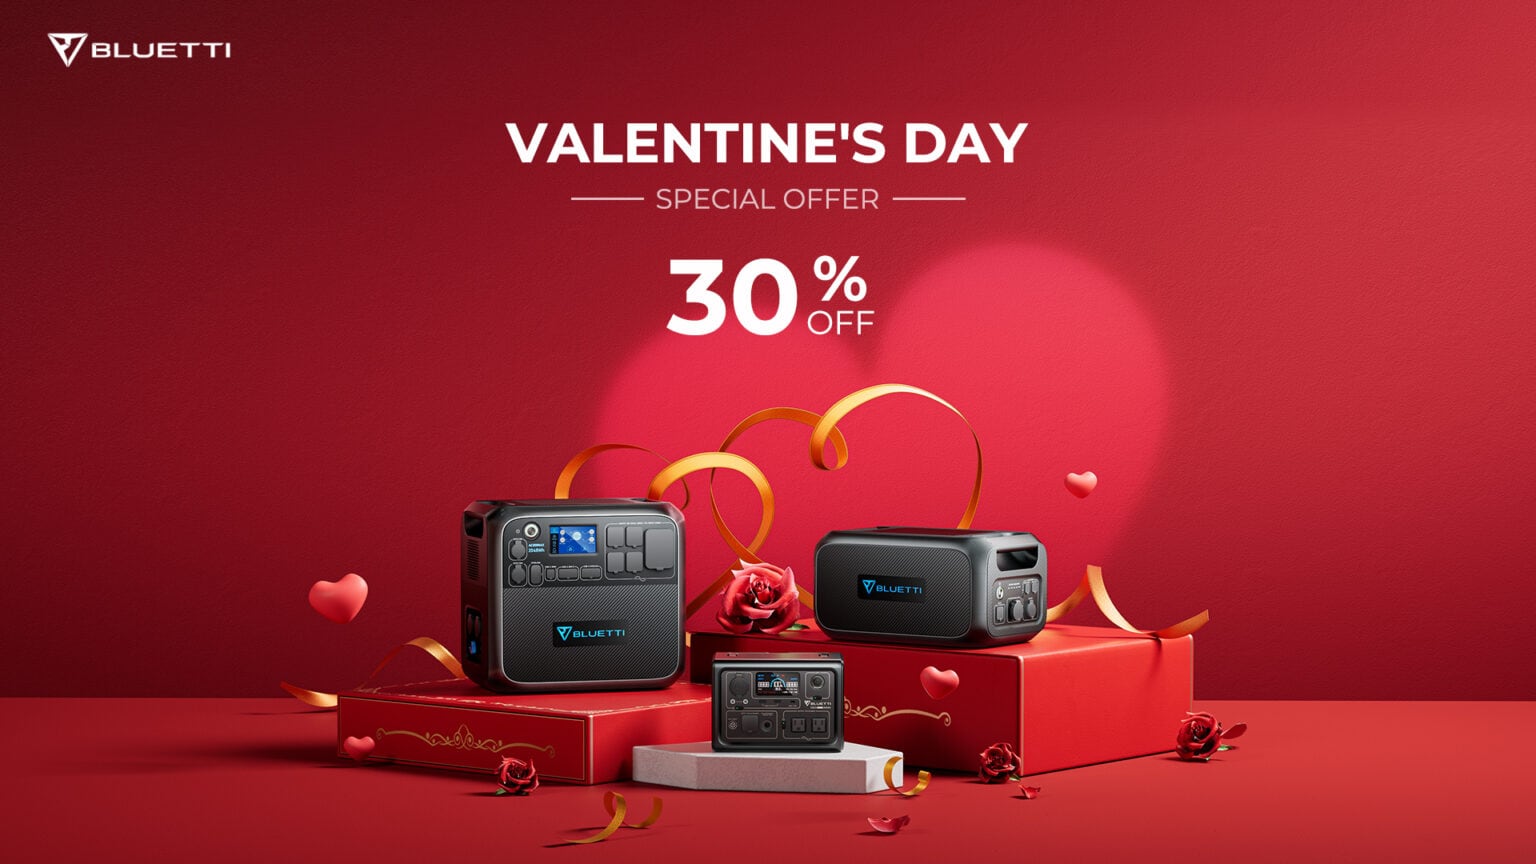 You can save 30% on solar generators and more in Bluetti's Valentine's Day Sale.